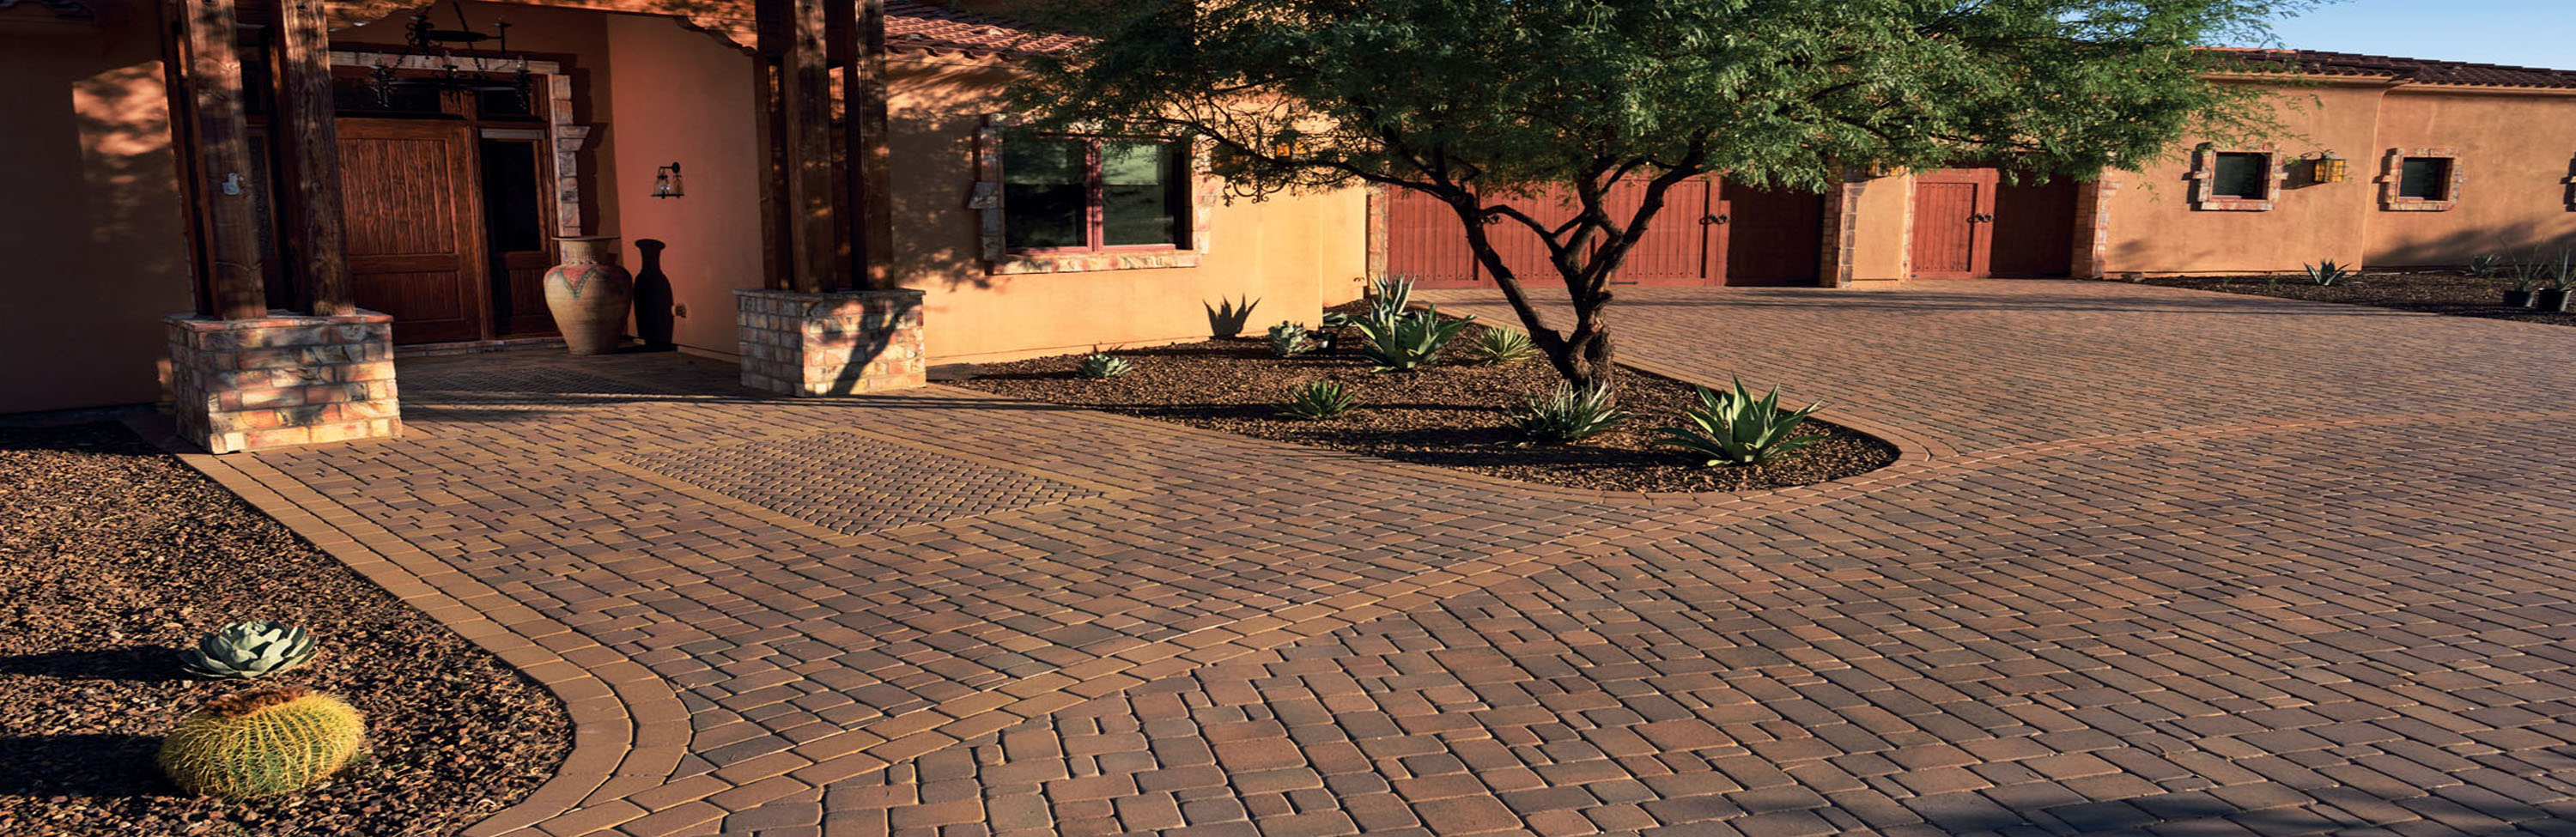 Photograph of Phoenix Paver's Standard Pavers installed in mixed patterns in entry way and circular drive in front of southwestern adobe plastered home with three car garage